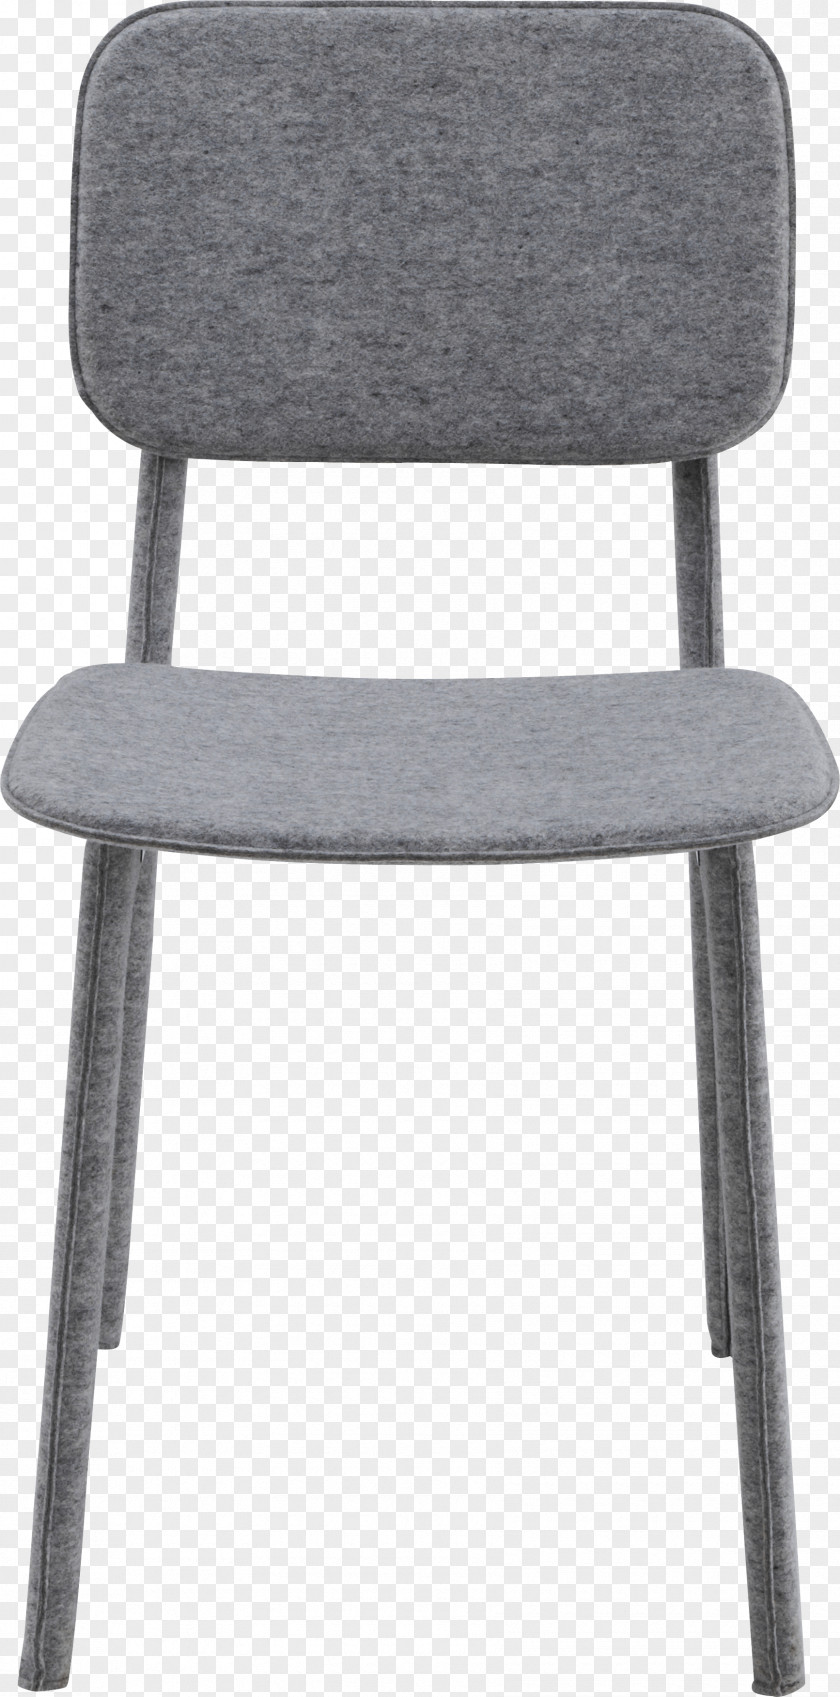 Chair Image Icon PNG